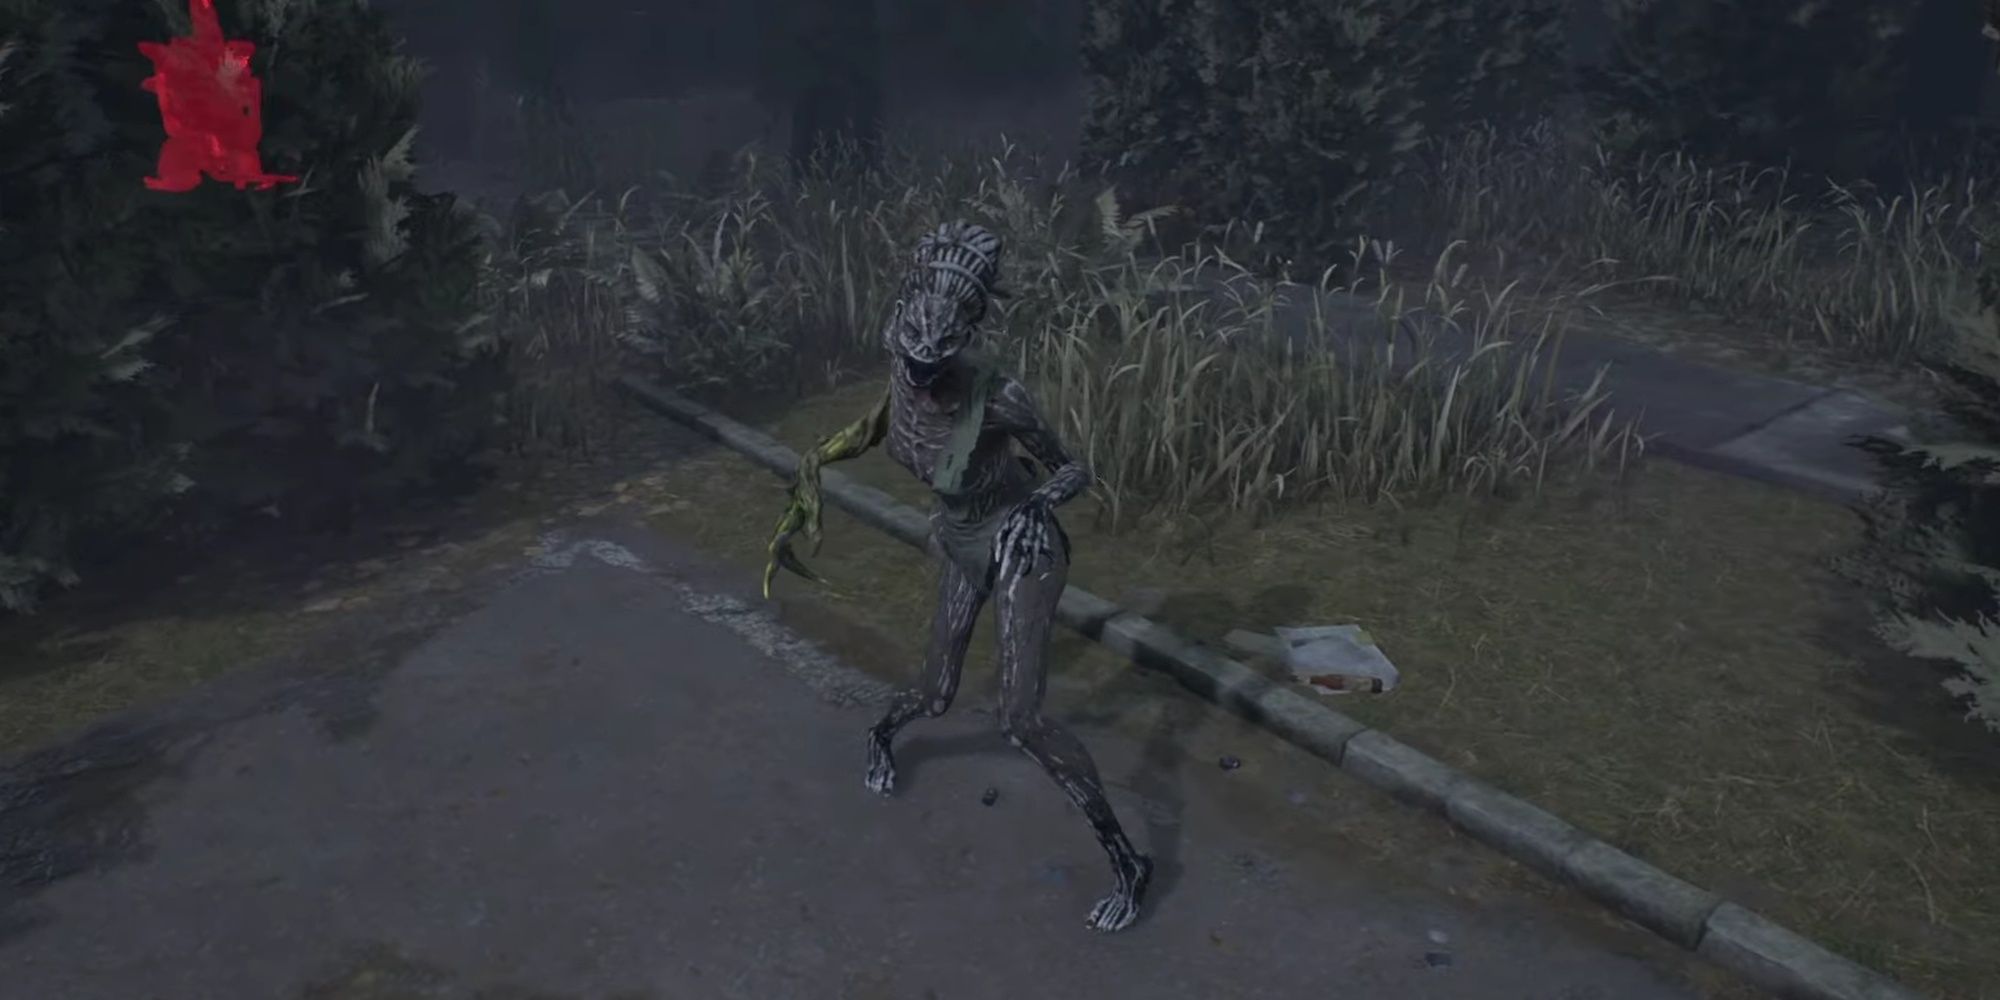 Dead By Daylight: Hag Character Model In A Trial